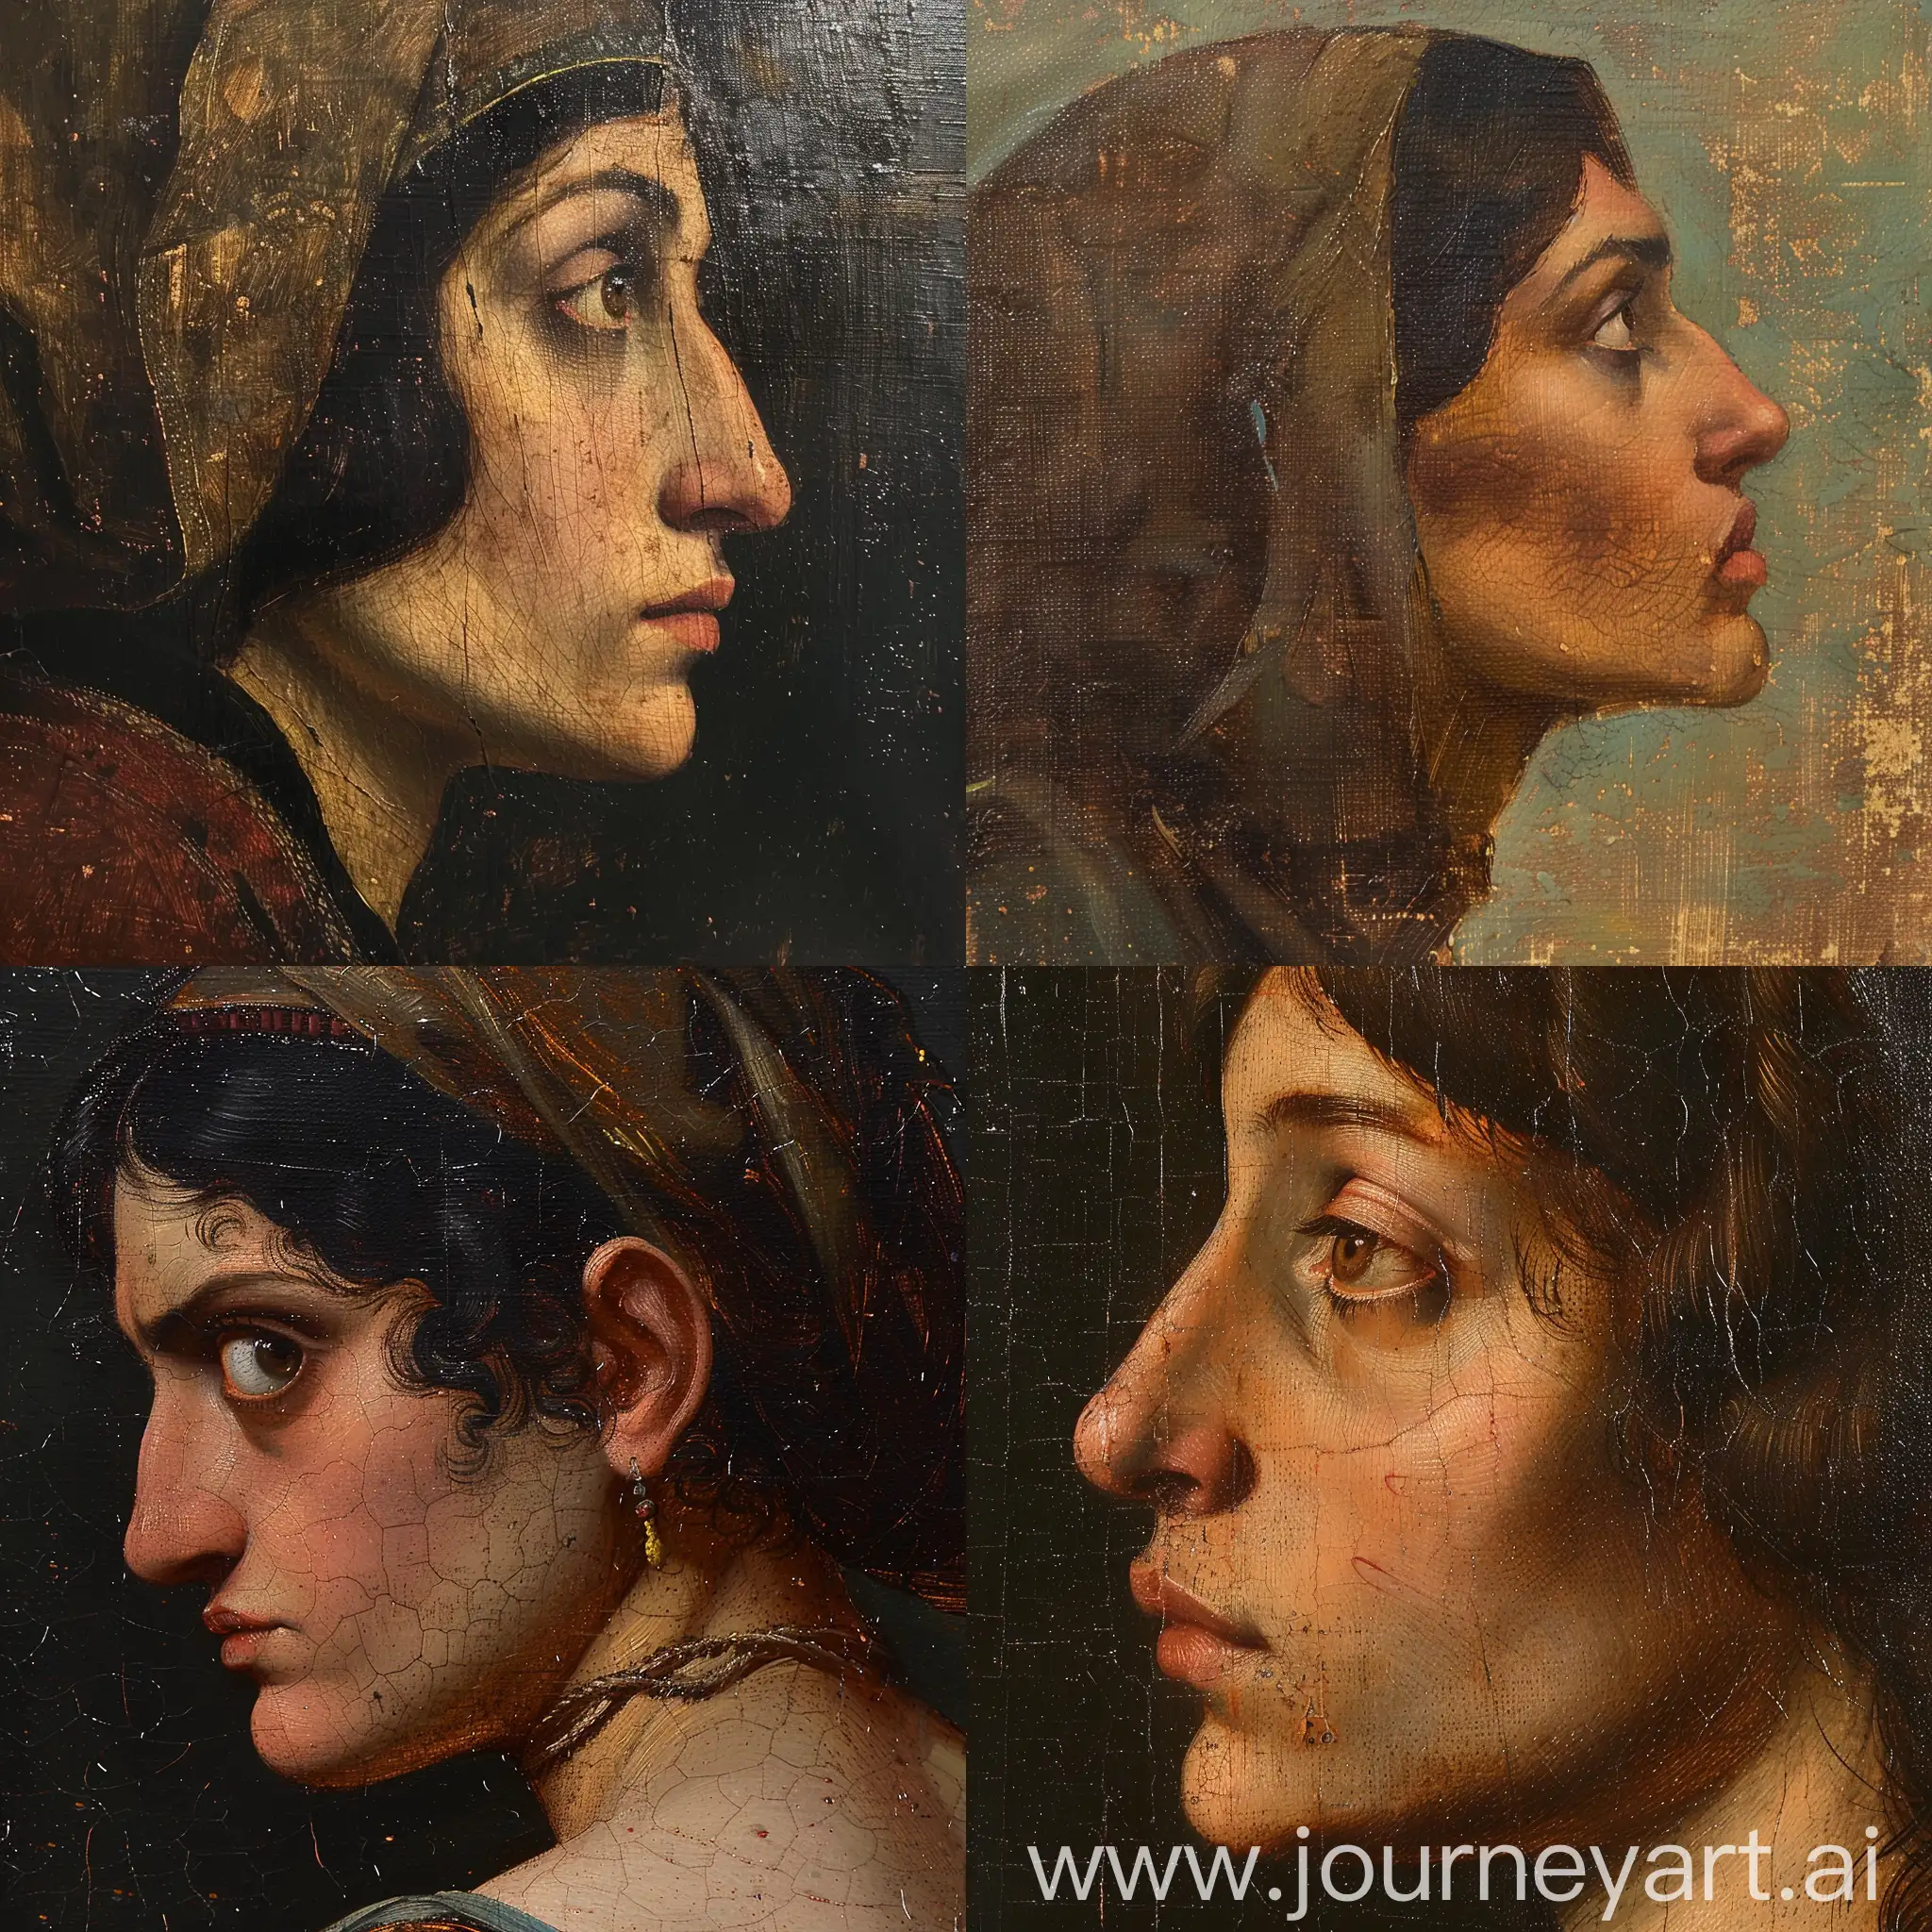 An Anatolian Greek woman. She looks very shady and her eyes have an evil sense to them. She also has a crooked nose. The painting is a side profile. Ottoman period. Islamic Renaissance style, Leonardo Davinci style, very detailed, oil painting.